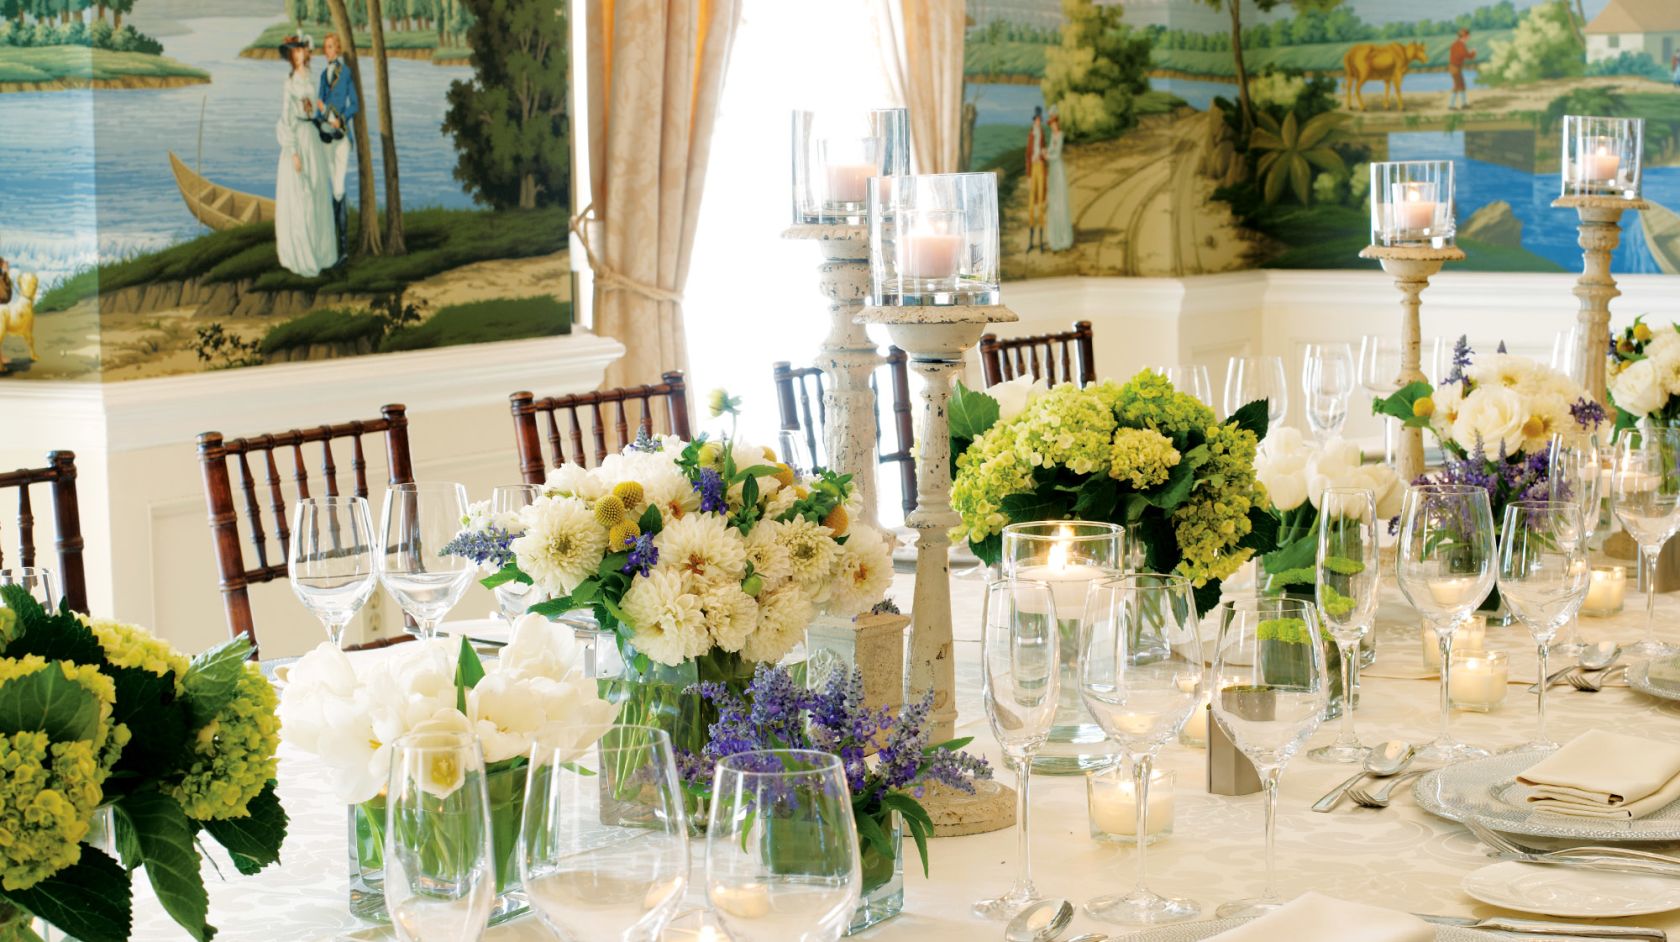 The Concorde Dining Table during an event in Washington DC